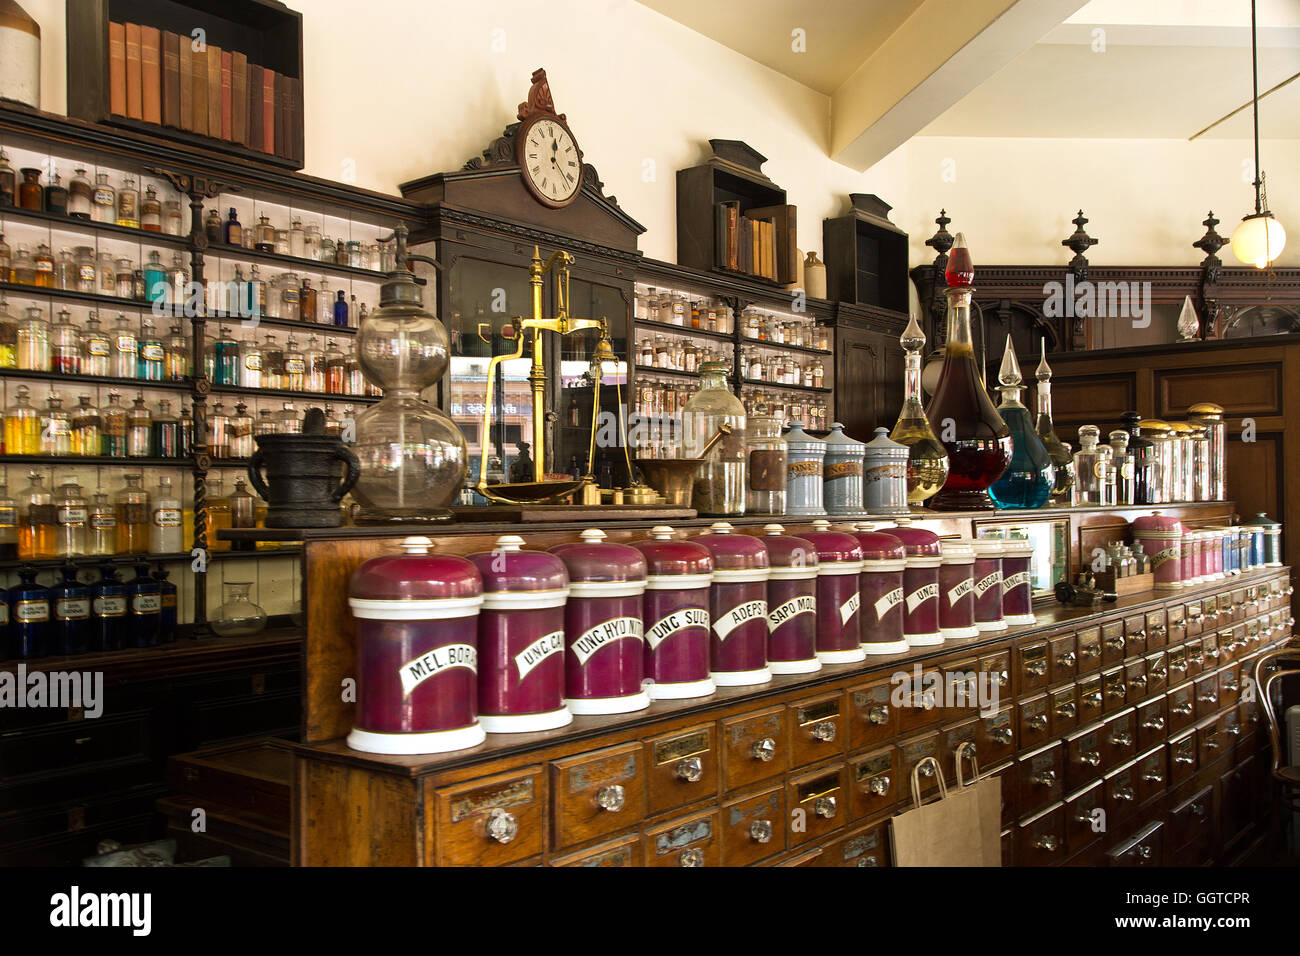 The Pharmacy Shelves - A wonderful display of bottles, potions and unctions in a Victorian pharmacist's shop. Stock Photo